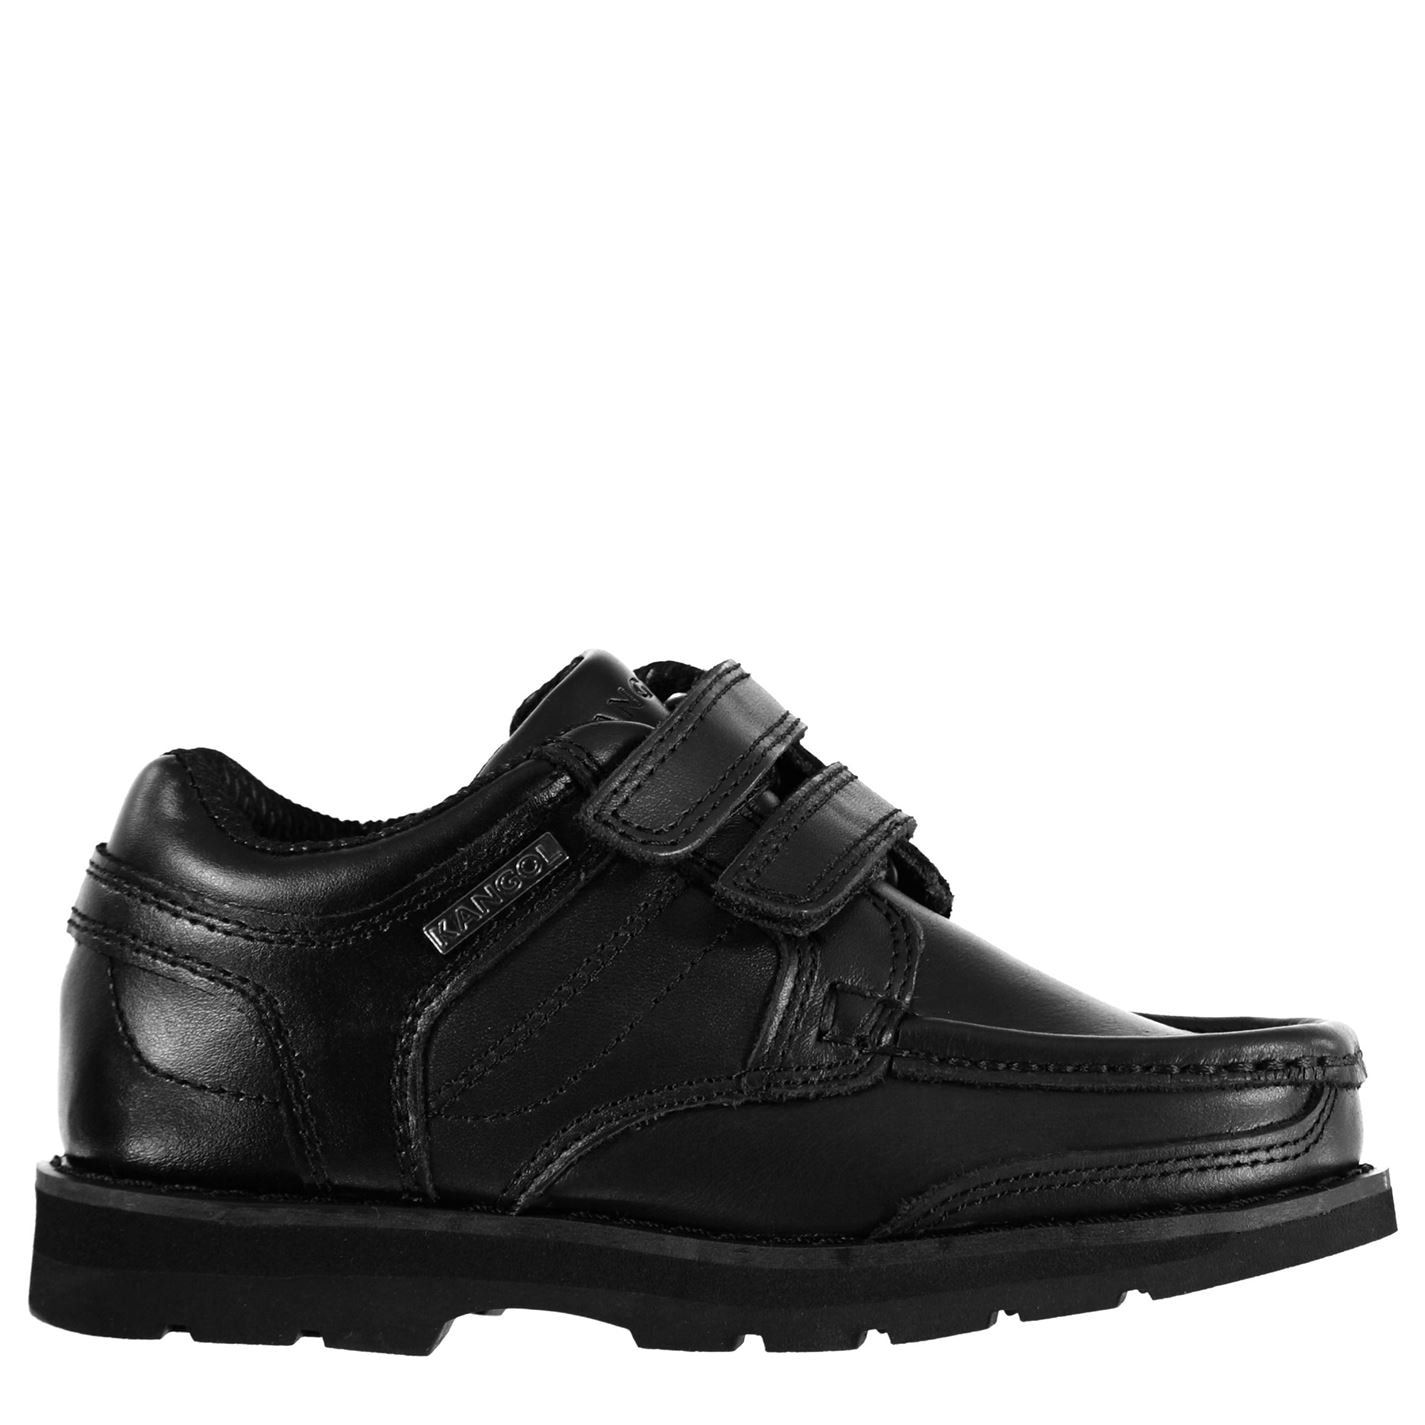 Kangol Kids Harrow Strapped Boys Dual Hook and Loop Leather Shoes Slip On